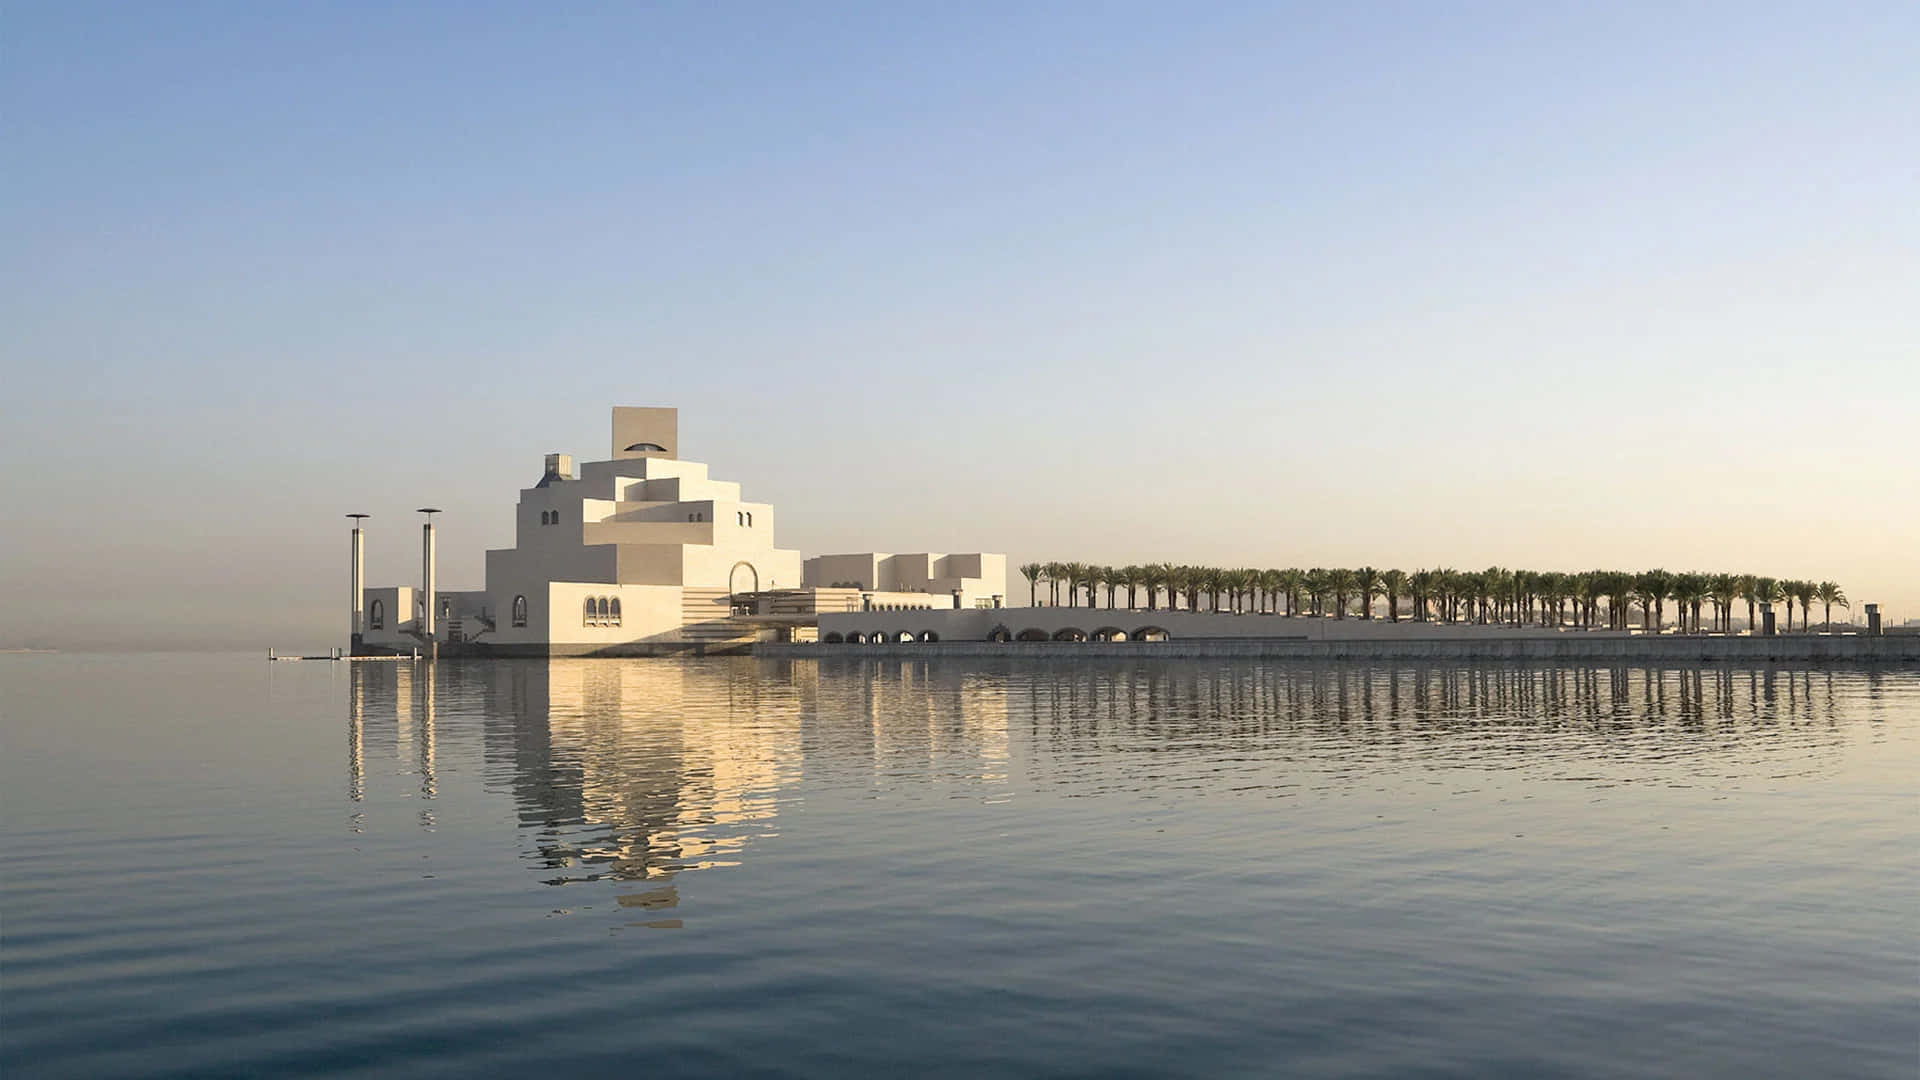 Museum Of Islamic Art From The Water Wallpaper